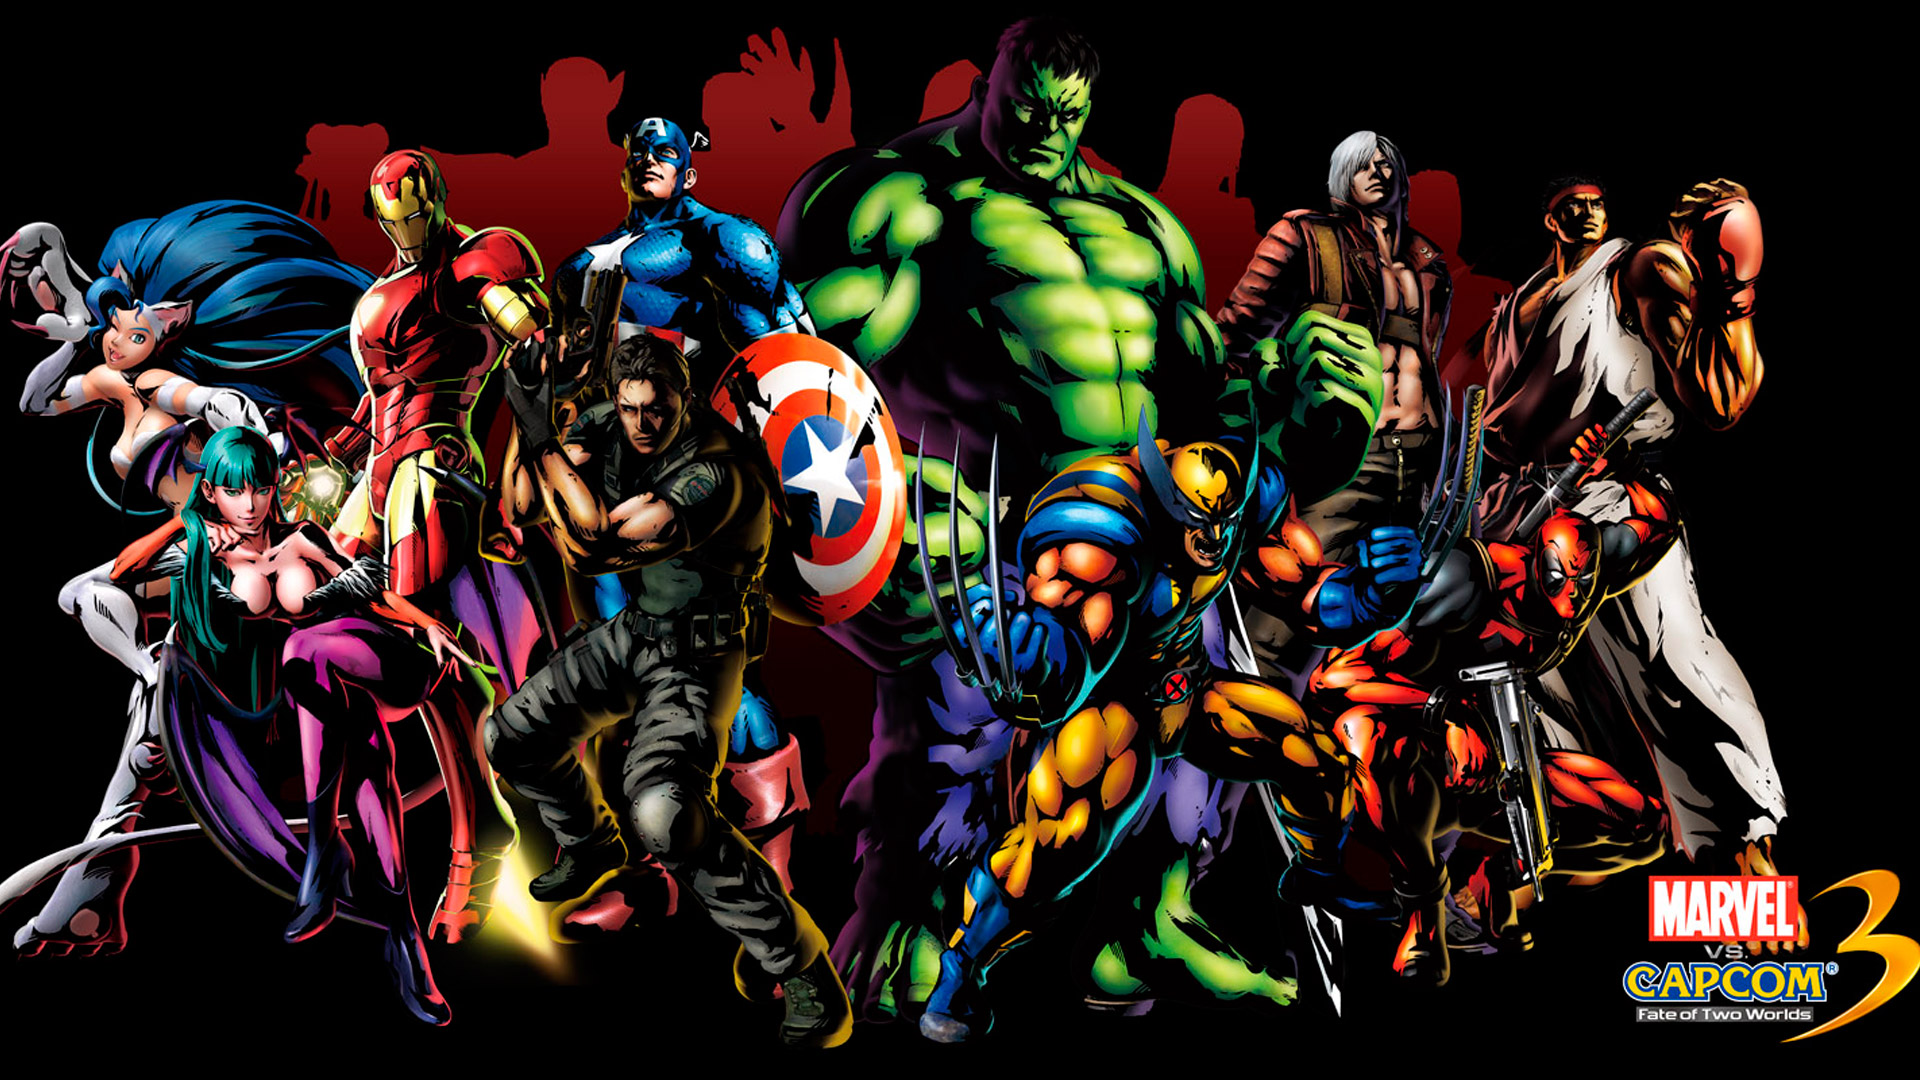 Marvel Heroes Wallpaper Background PC 1920x1080